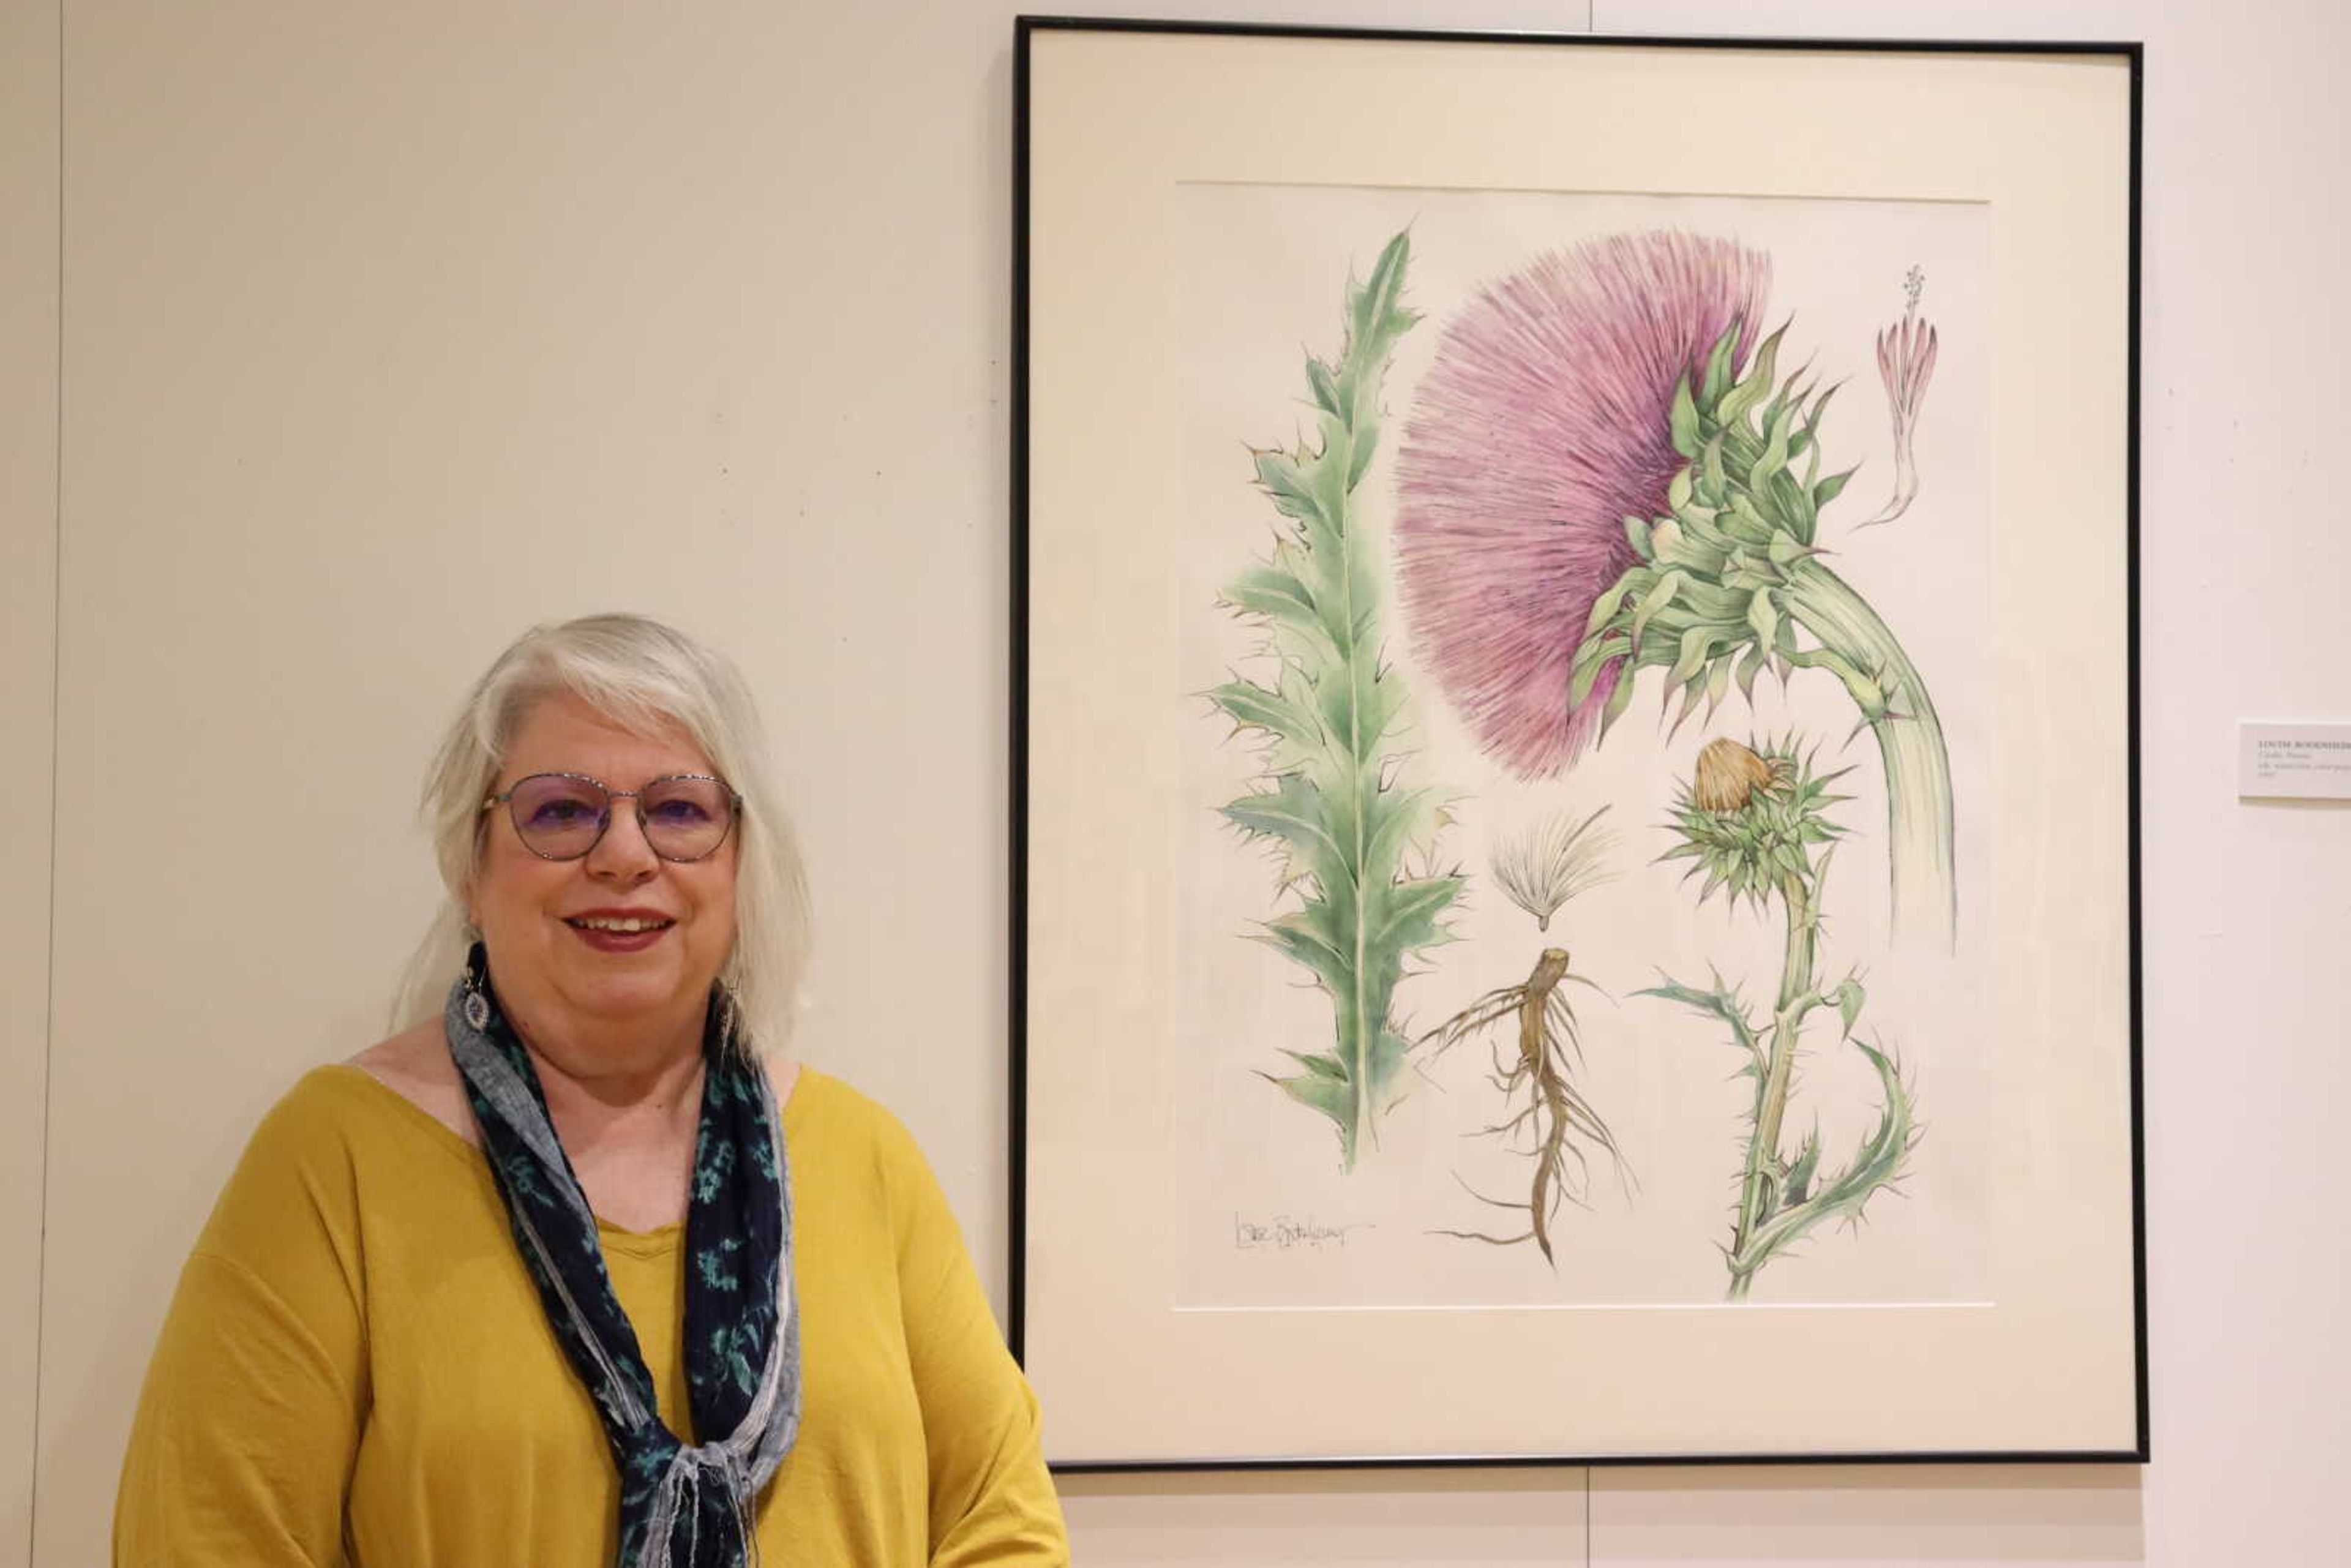 SEMO professor of Art & Design Louise Bodenheimer poses in front of one of her favorite art pieces, a pink thistle. The piece is featured in a collection of over 300 total artistic works in Bodenheimer's "Hybrid" gallery at the Crisp Museum.